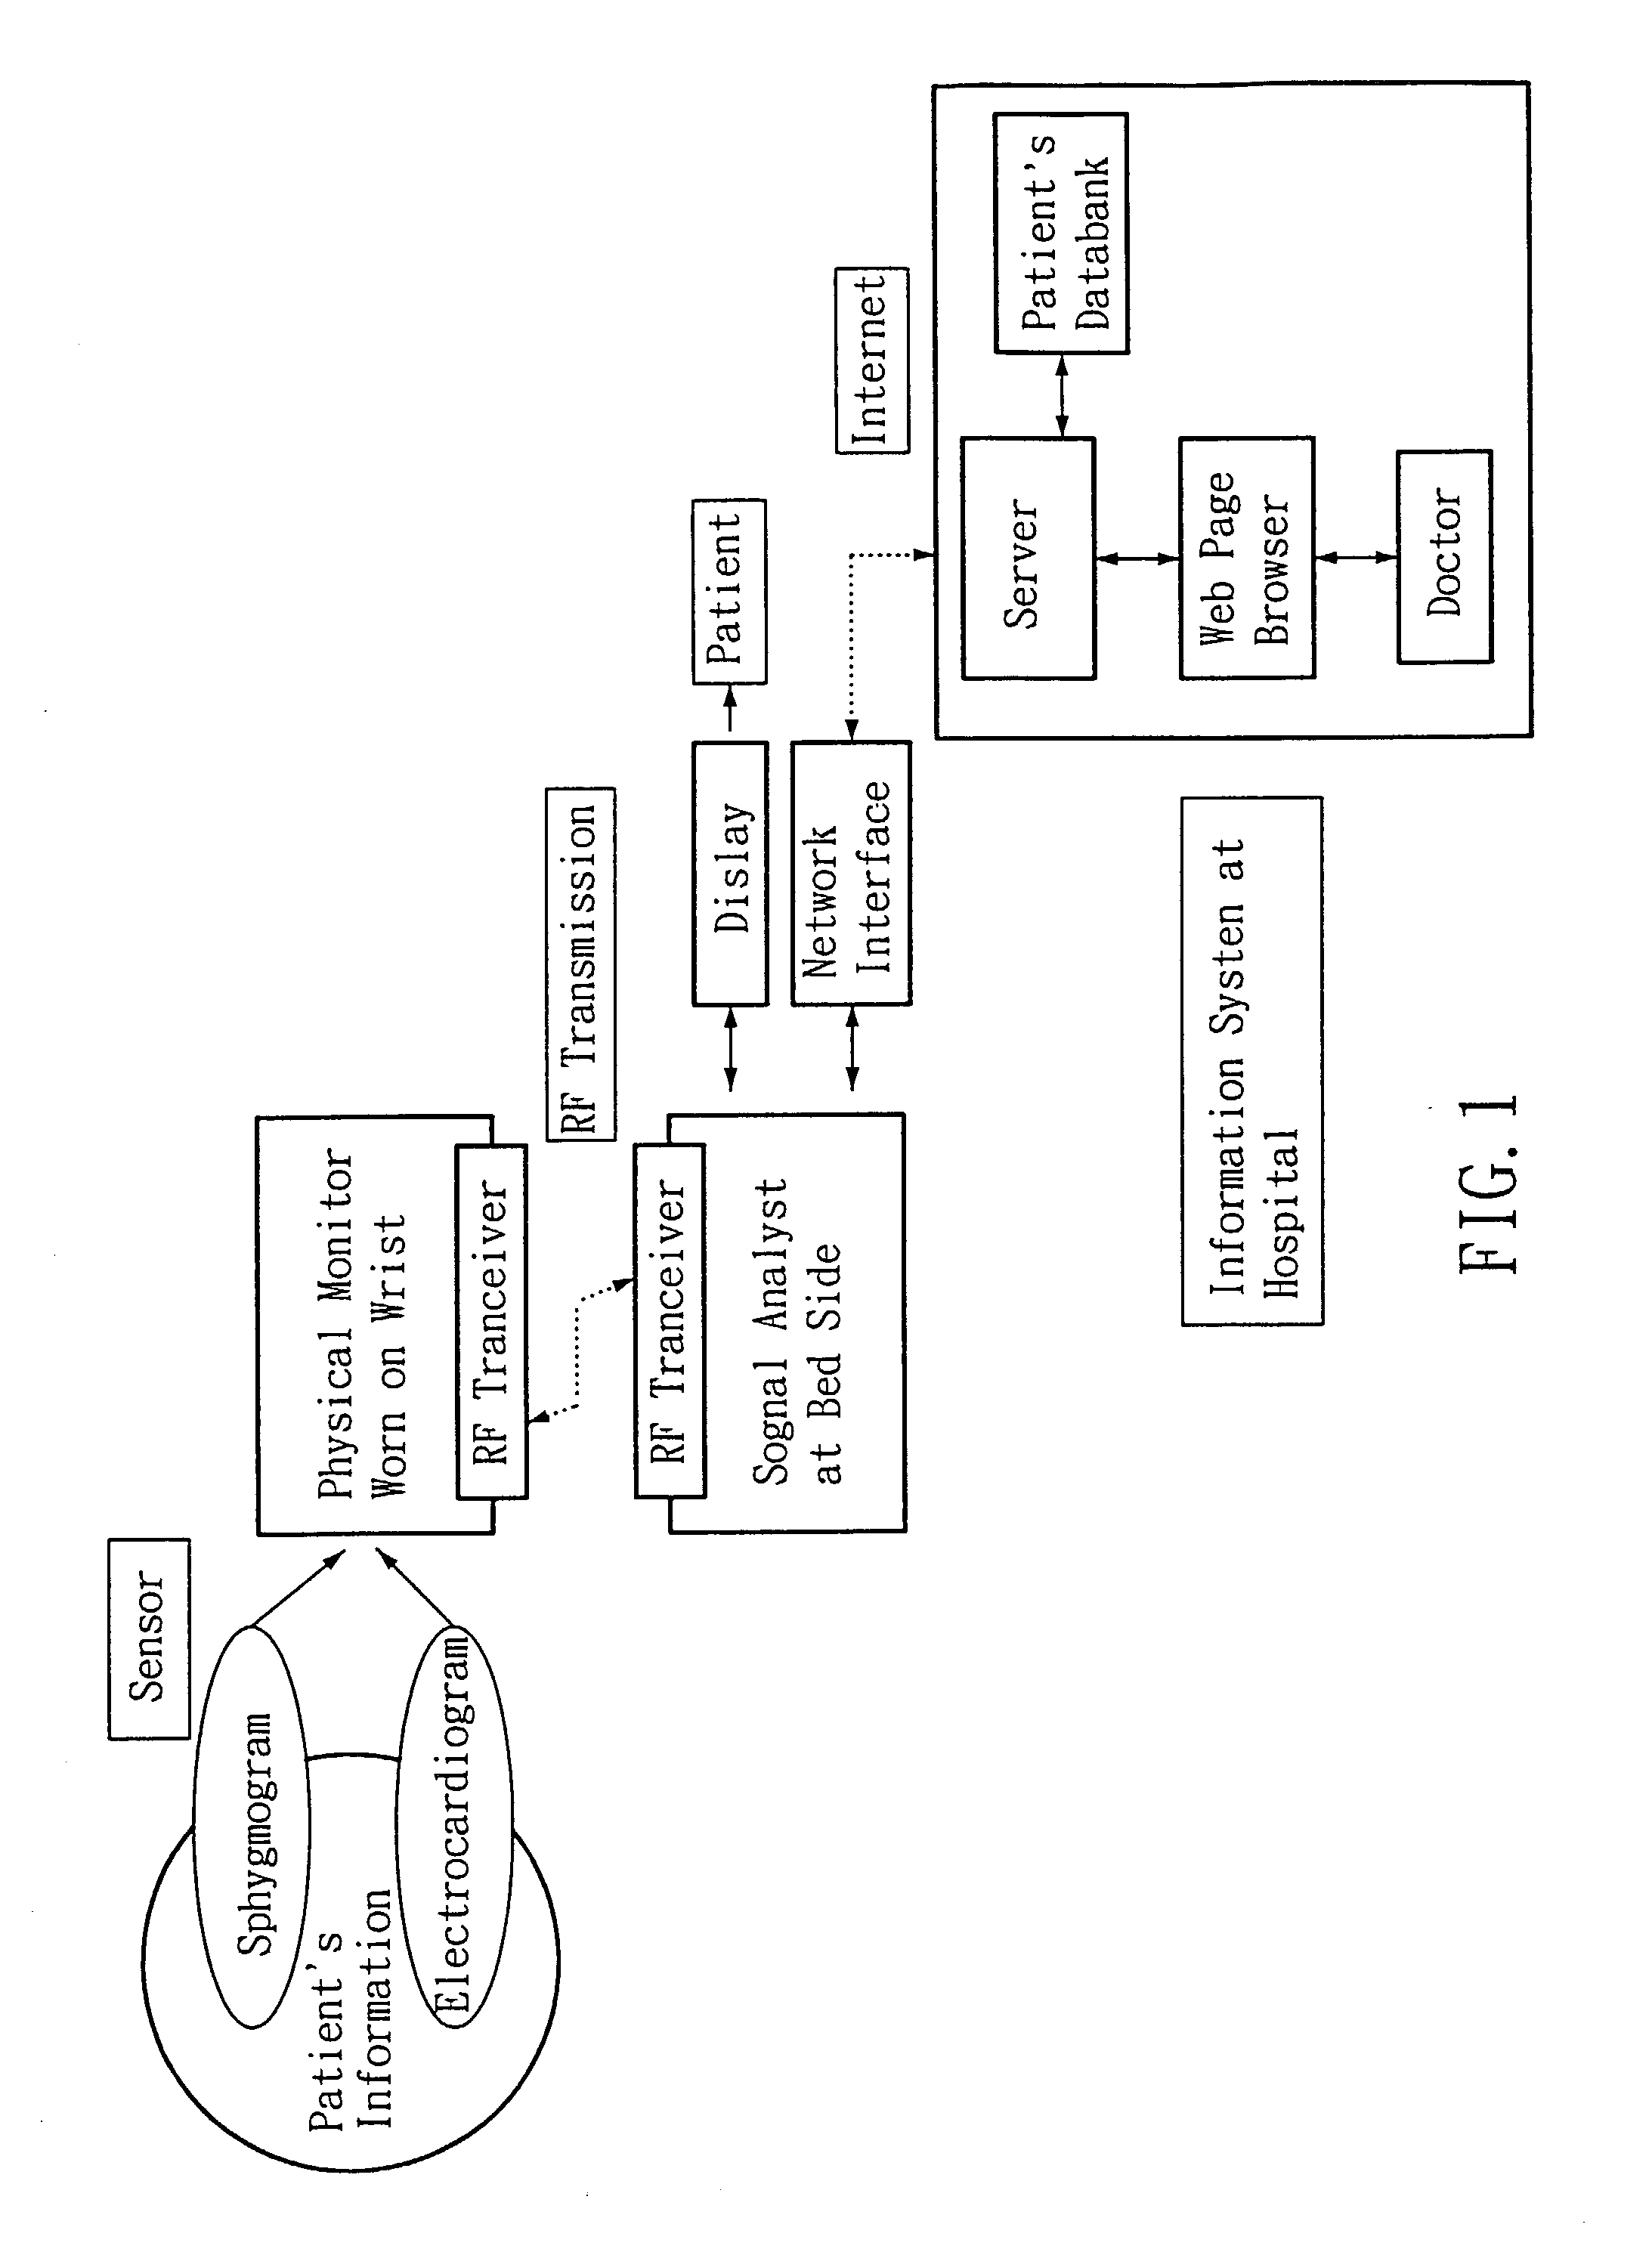 Non-invasive apparatus system for monitoring autonomic nervous system and uses thereof